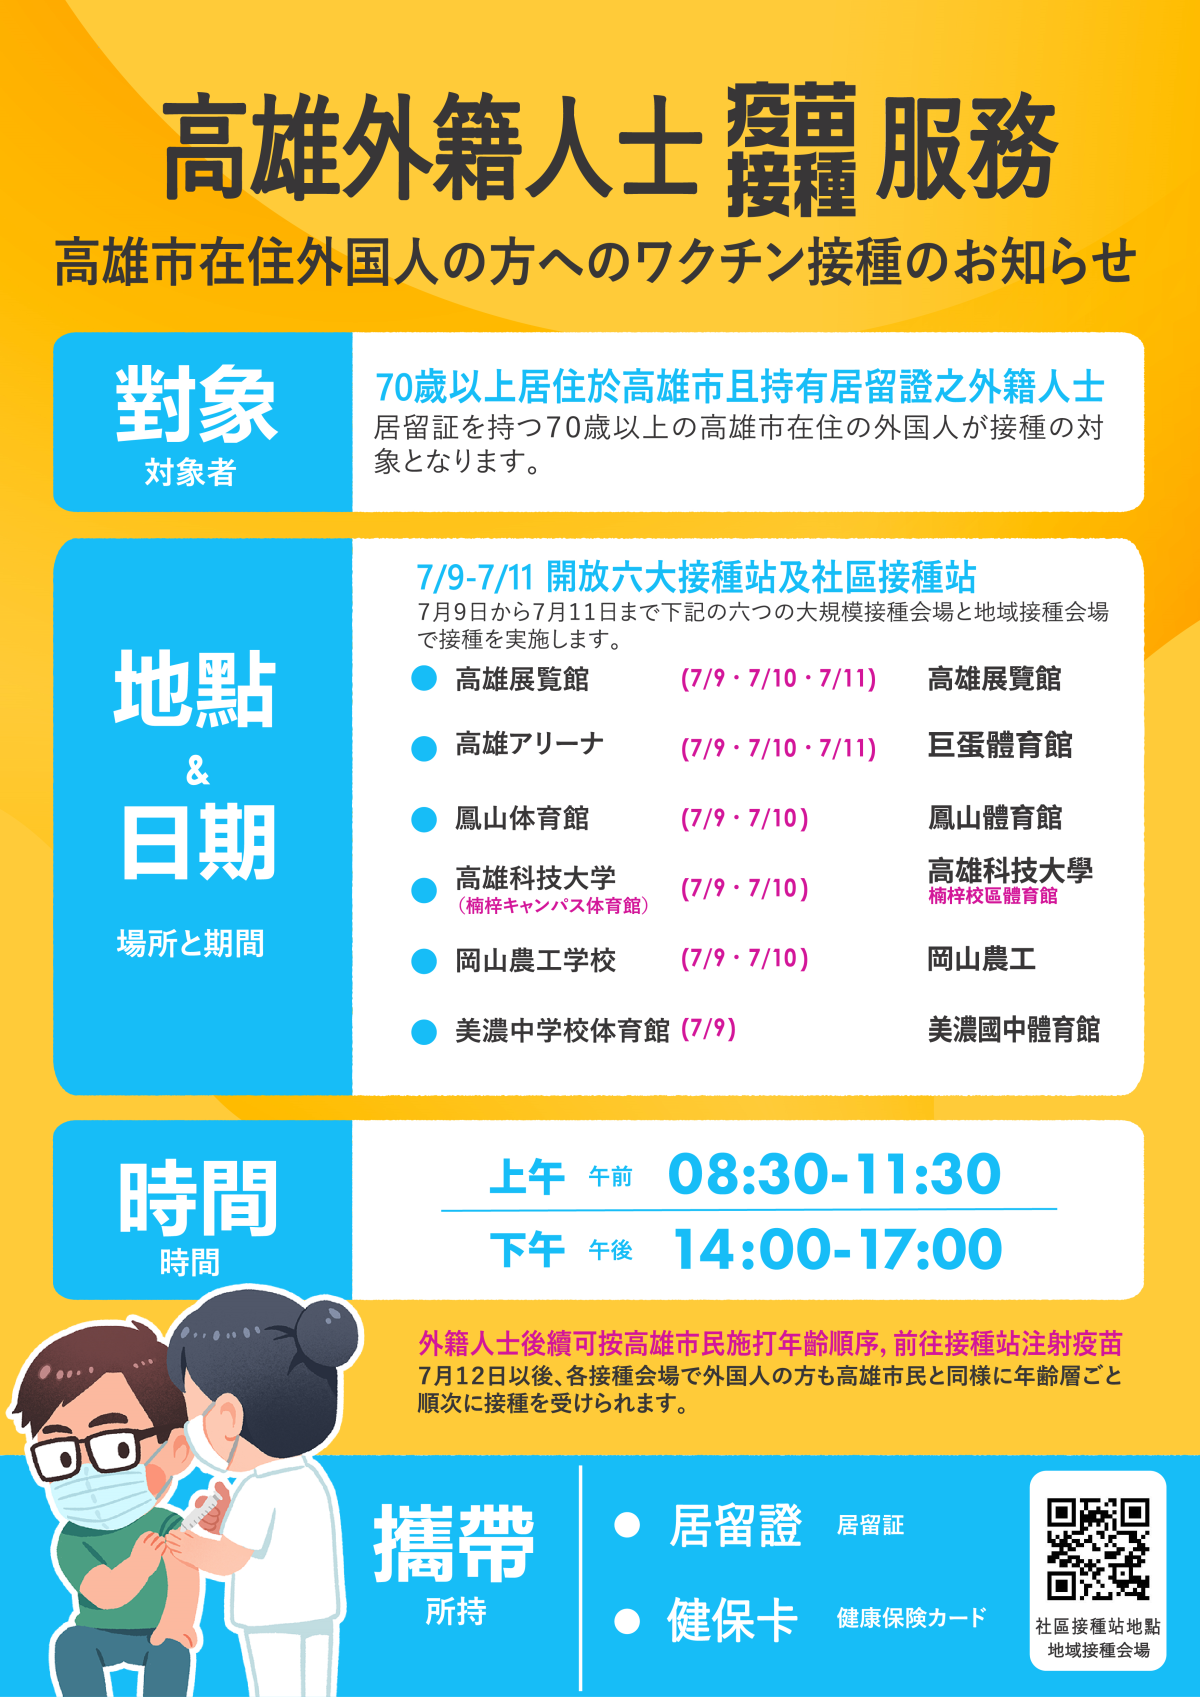 Vaccination for Foreigners in Kaohsiung - Japanese